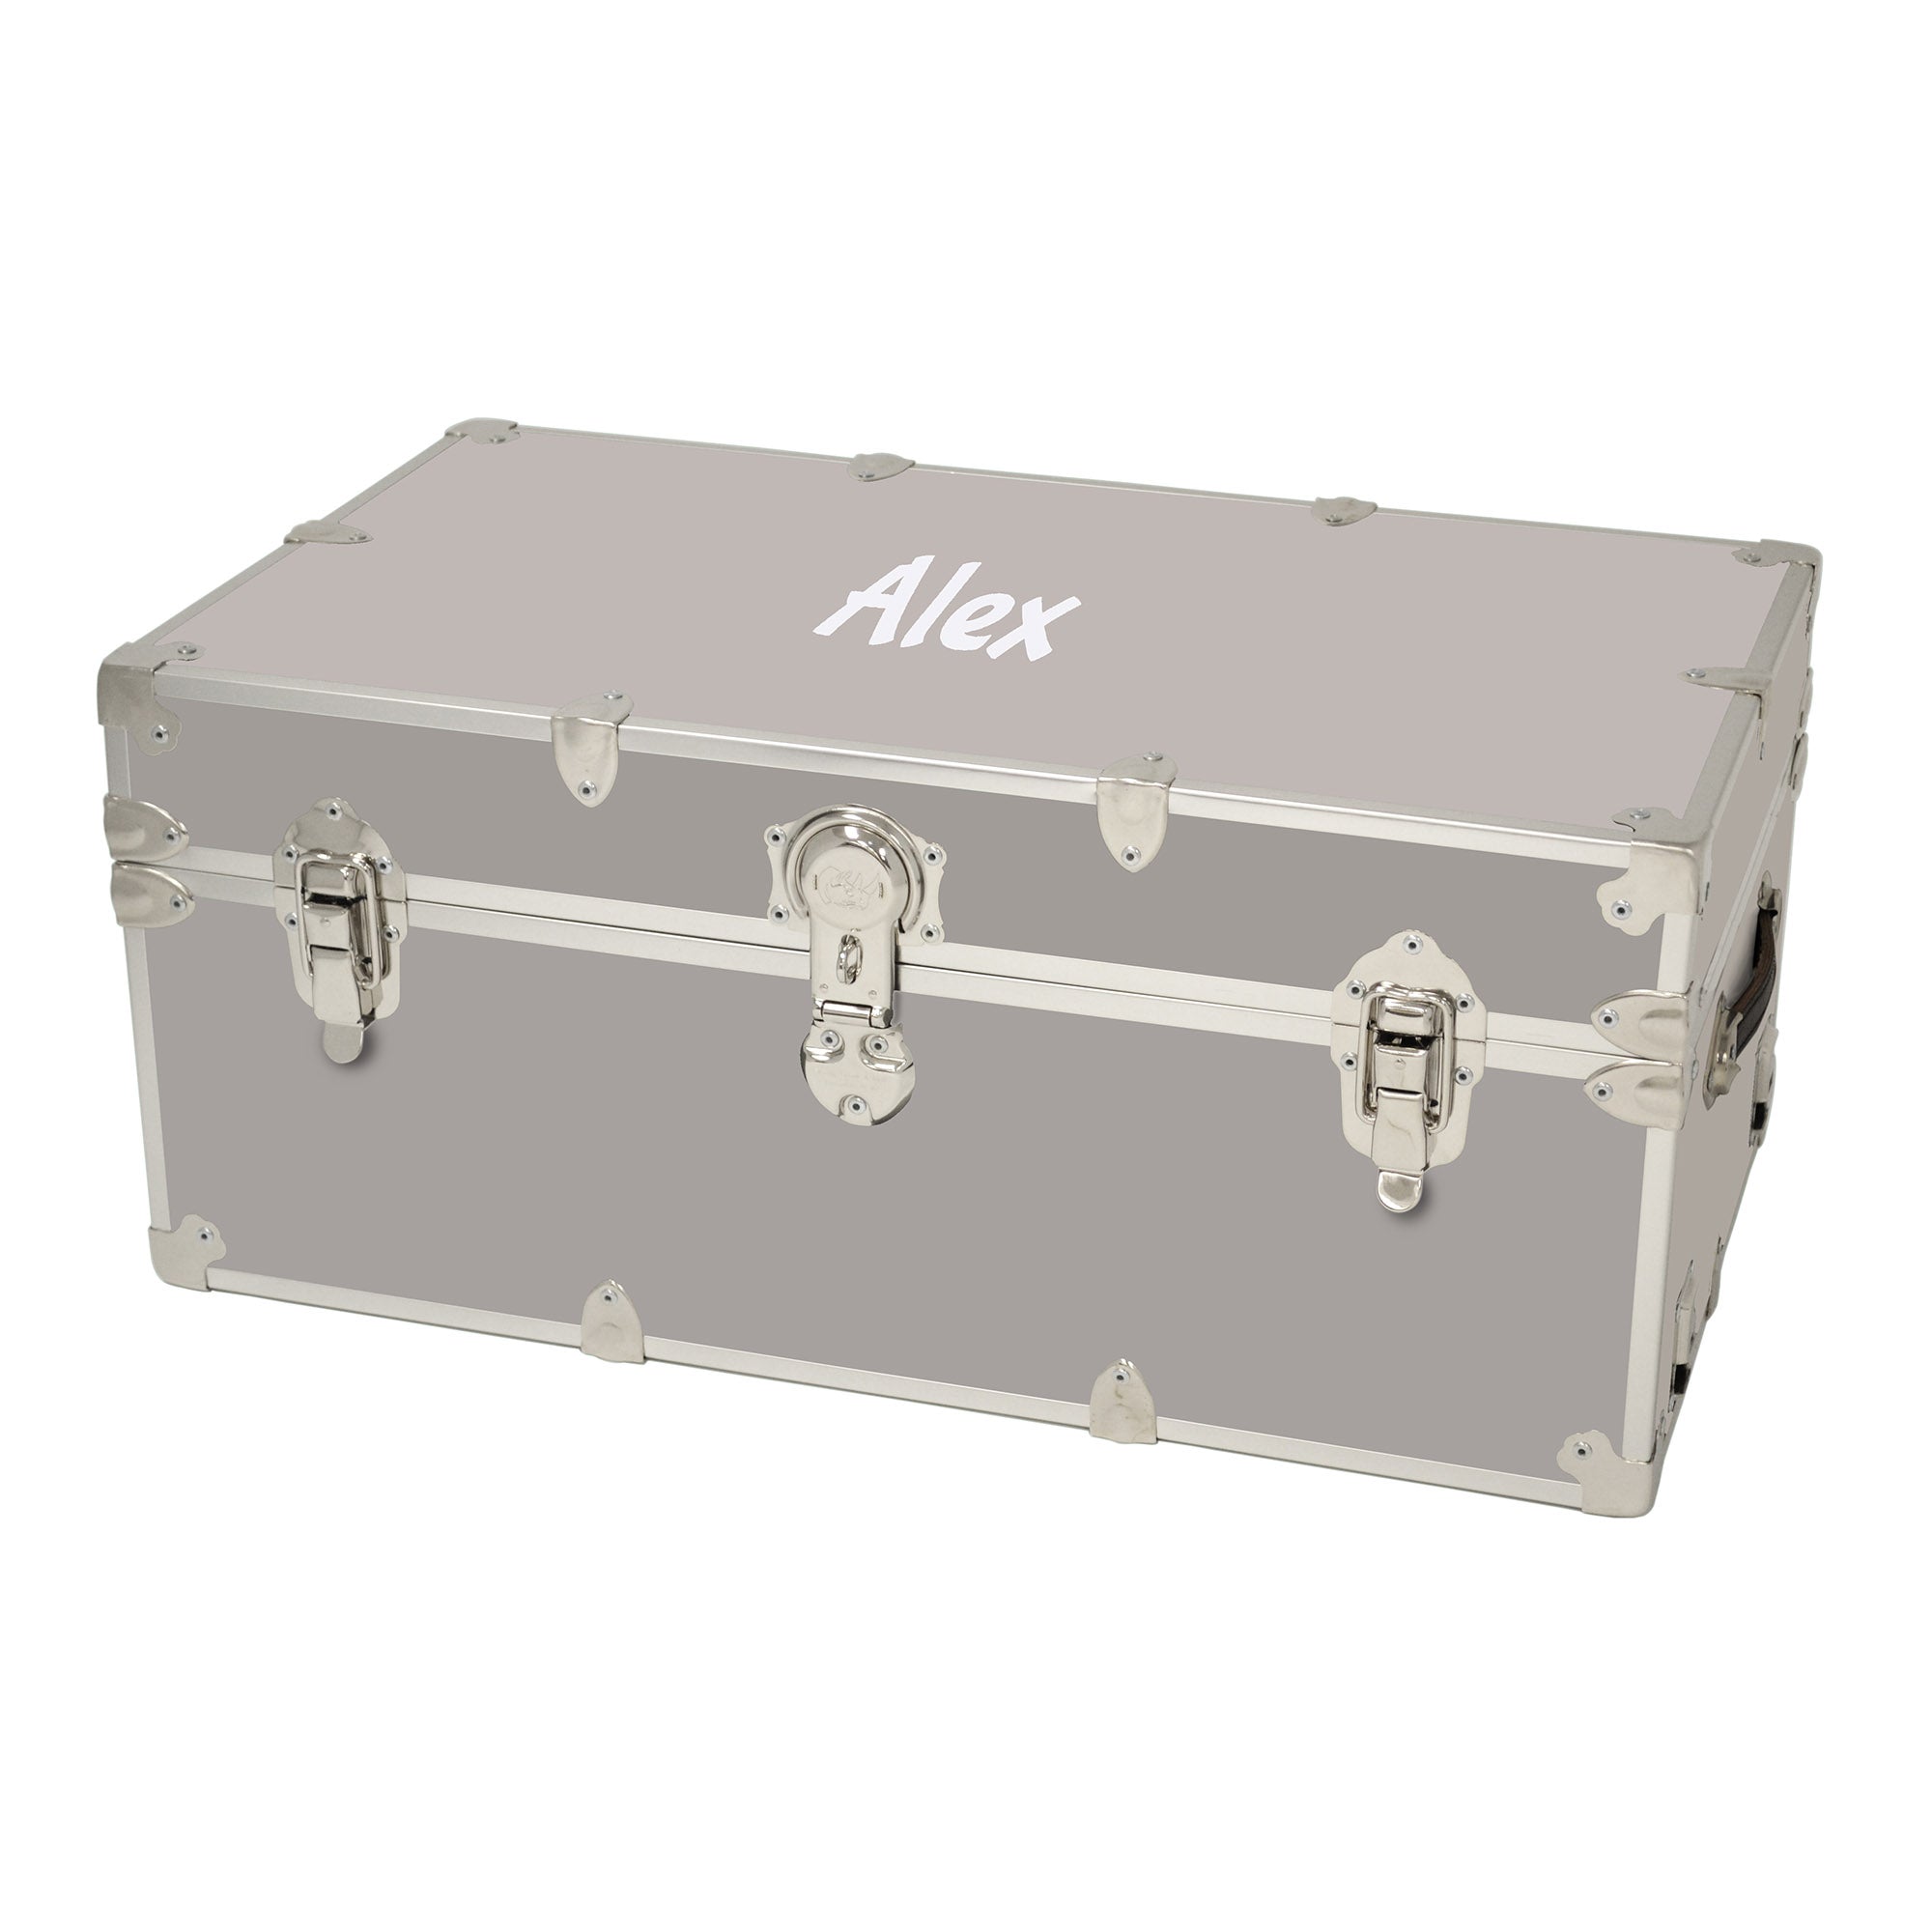 XL Sticker Trunk with Personalized Monogramming – Trunk Outlet Kanakuk